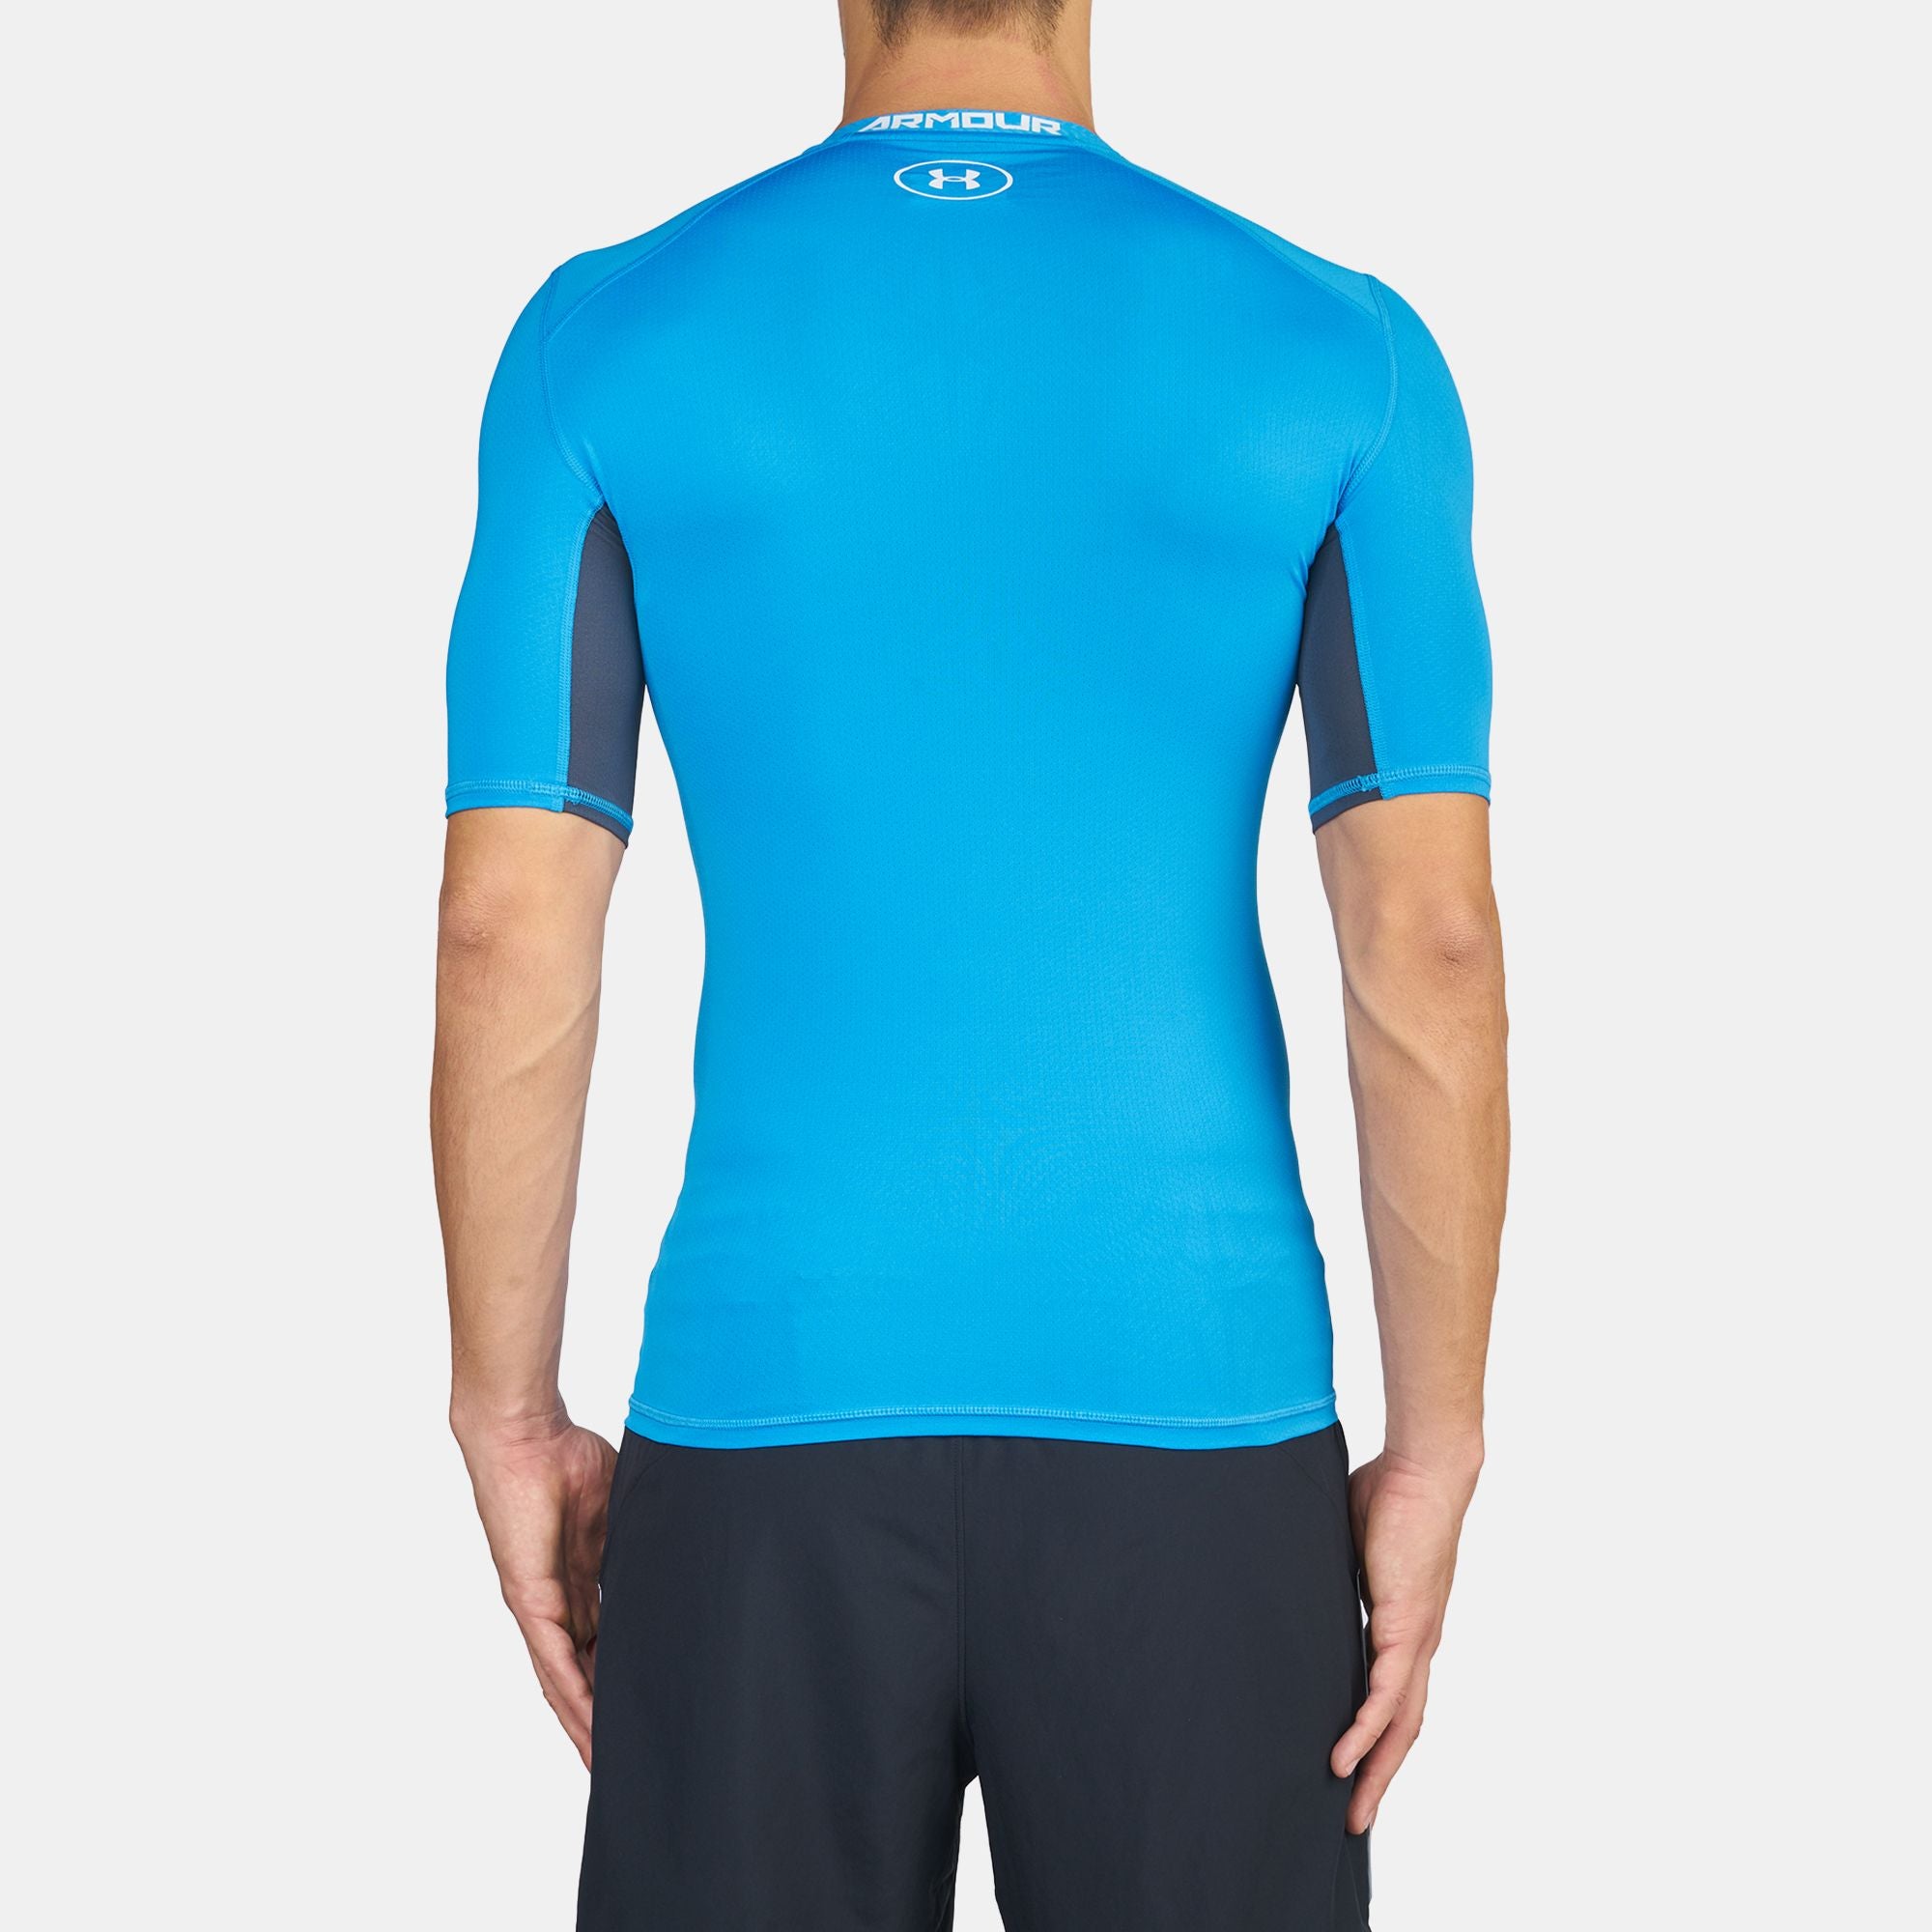 Under Armour Coolswitch Compression Long Sleeve Top for Men